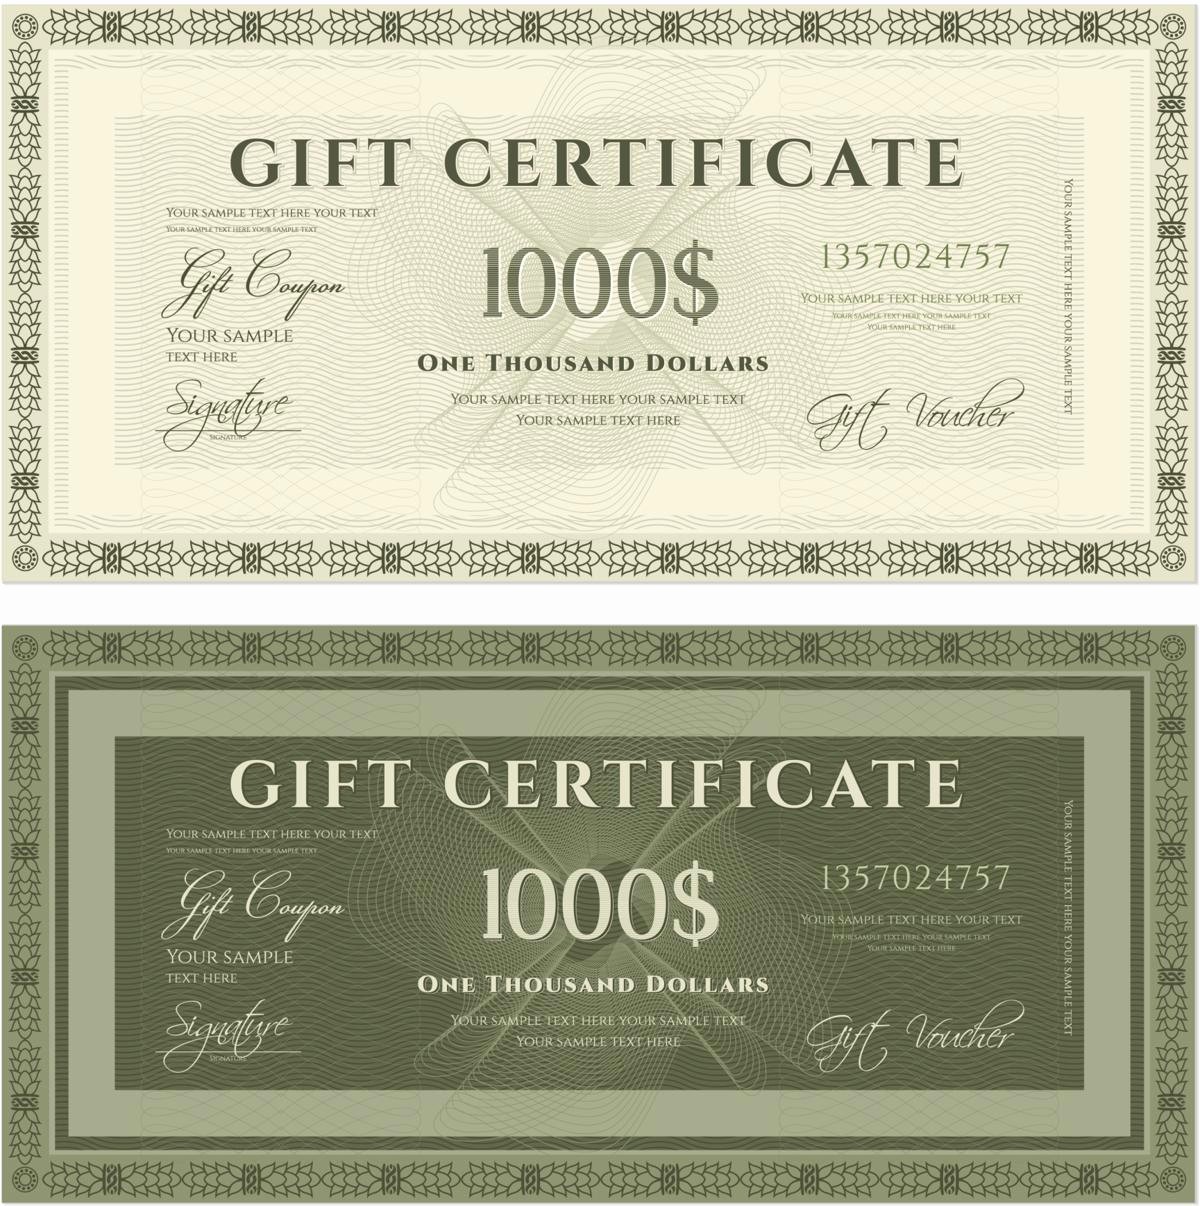 How to Make Gift Certificate Fresh Sample Wordings for Gift Certificates You Ll Want to Copy now